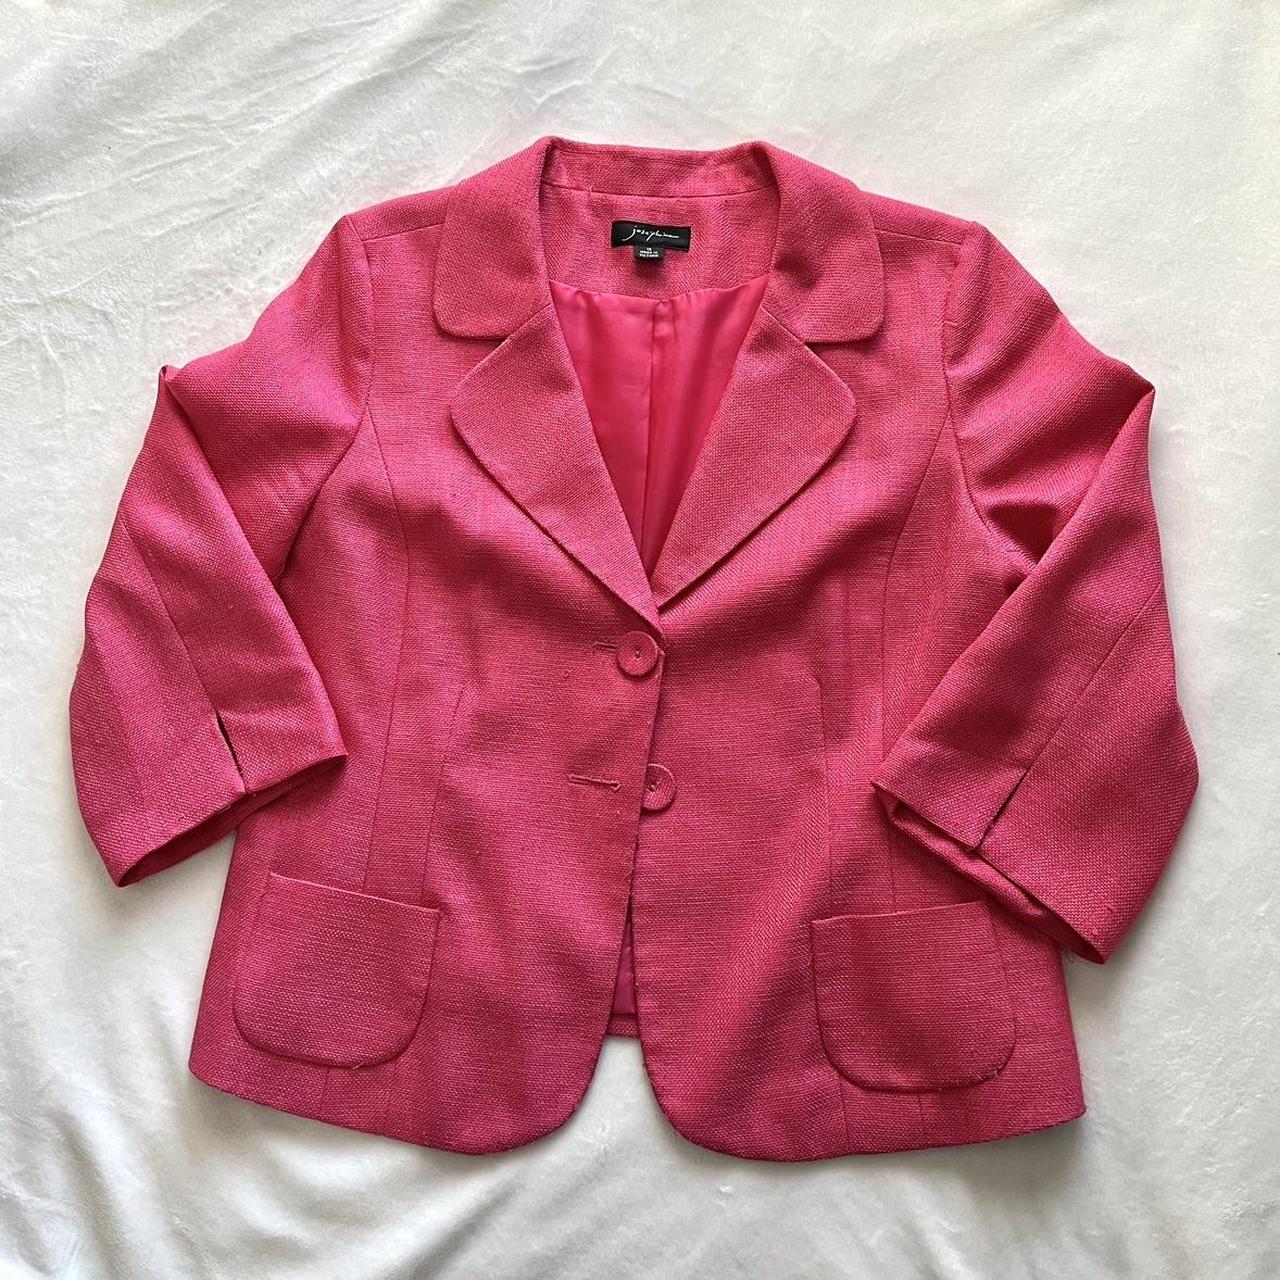 Josephine Hot Pink Blazer Jacket Thrifted a while... - Depop